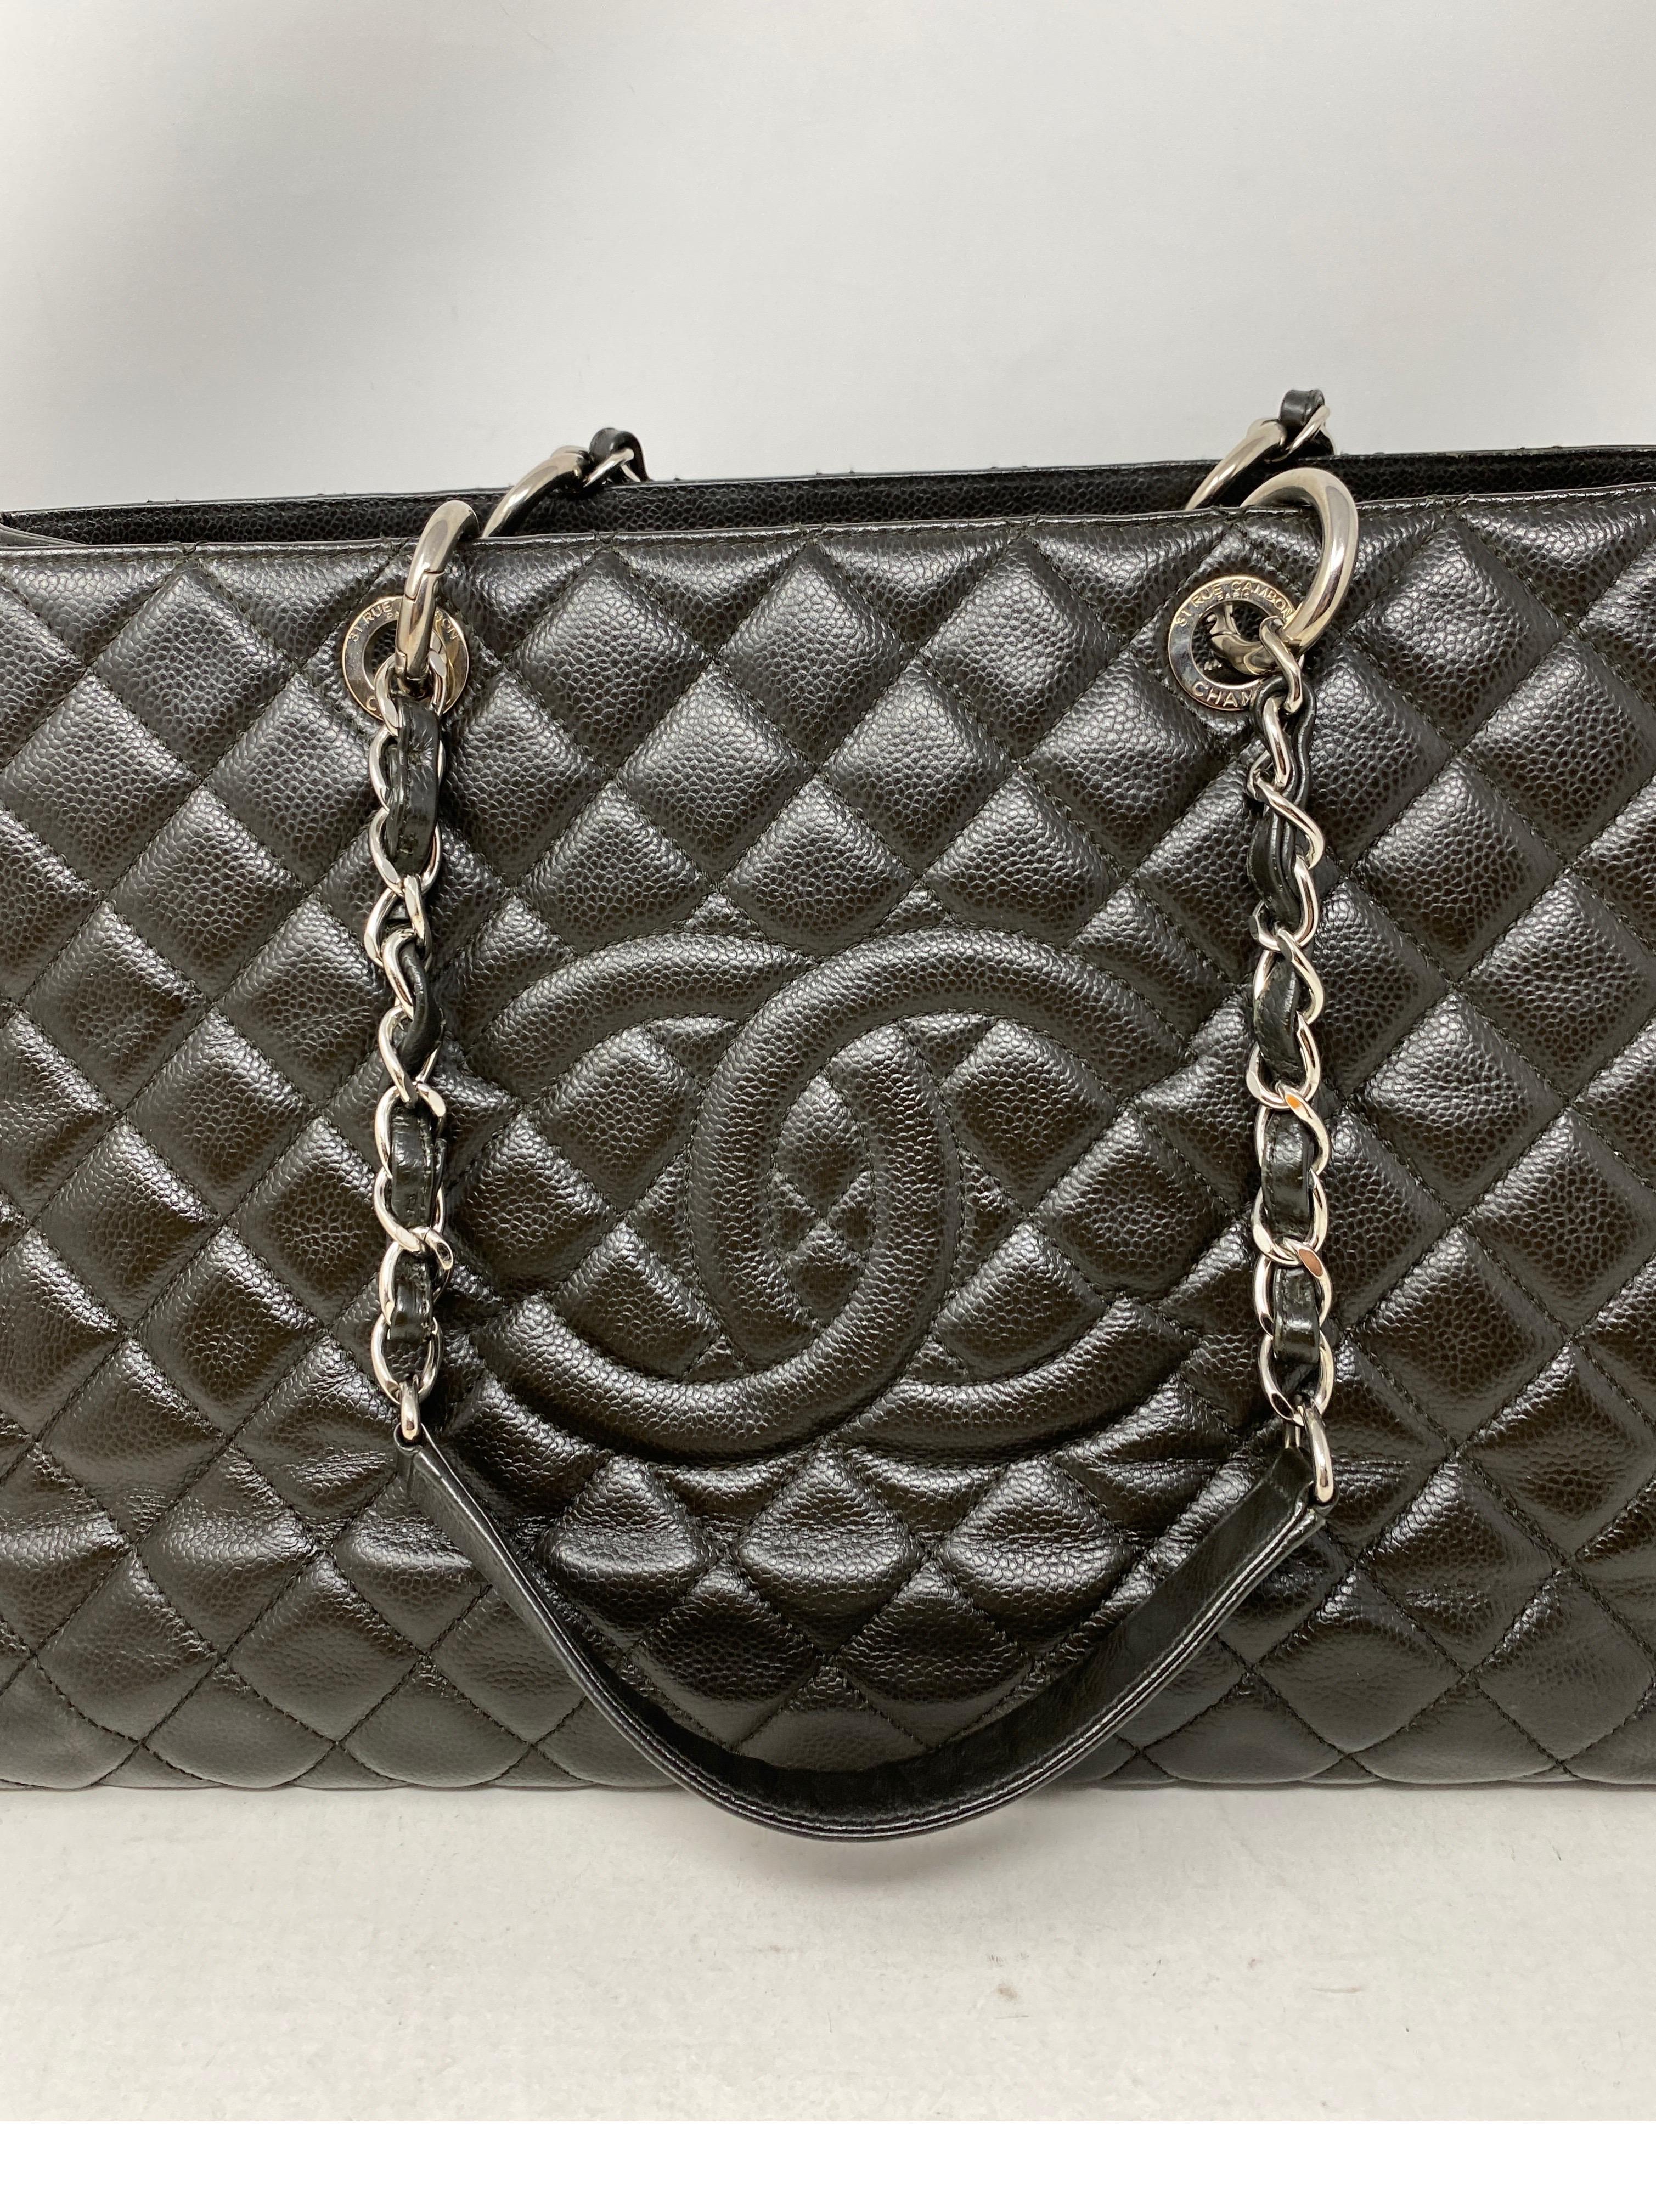 Chanel XL Black Grand Shopper Tote Bag. Silver hardware. Almost dark brown/ black color. Great neutral bag. Oversized XL tote to fit laptop or more. Caviar leather. Hard to find size. Retired style from Chanel. Has light wear on the inside. A few